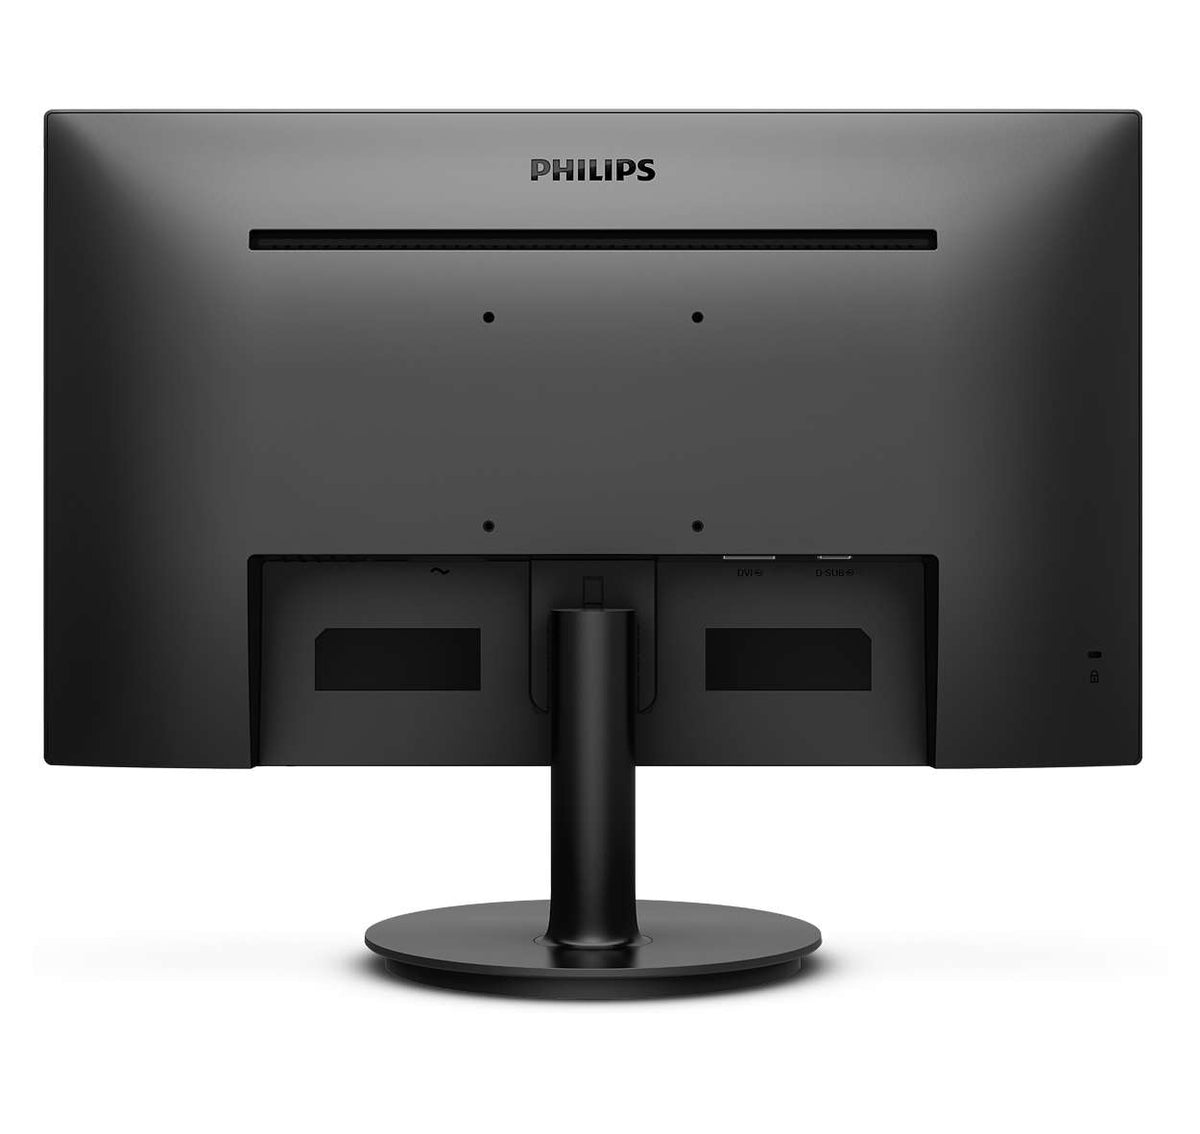 PHILIPS MONITOR LED 22IN (21.5)MNTR